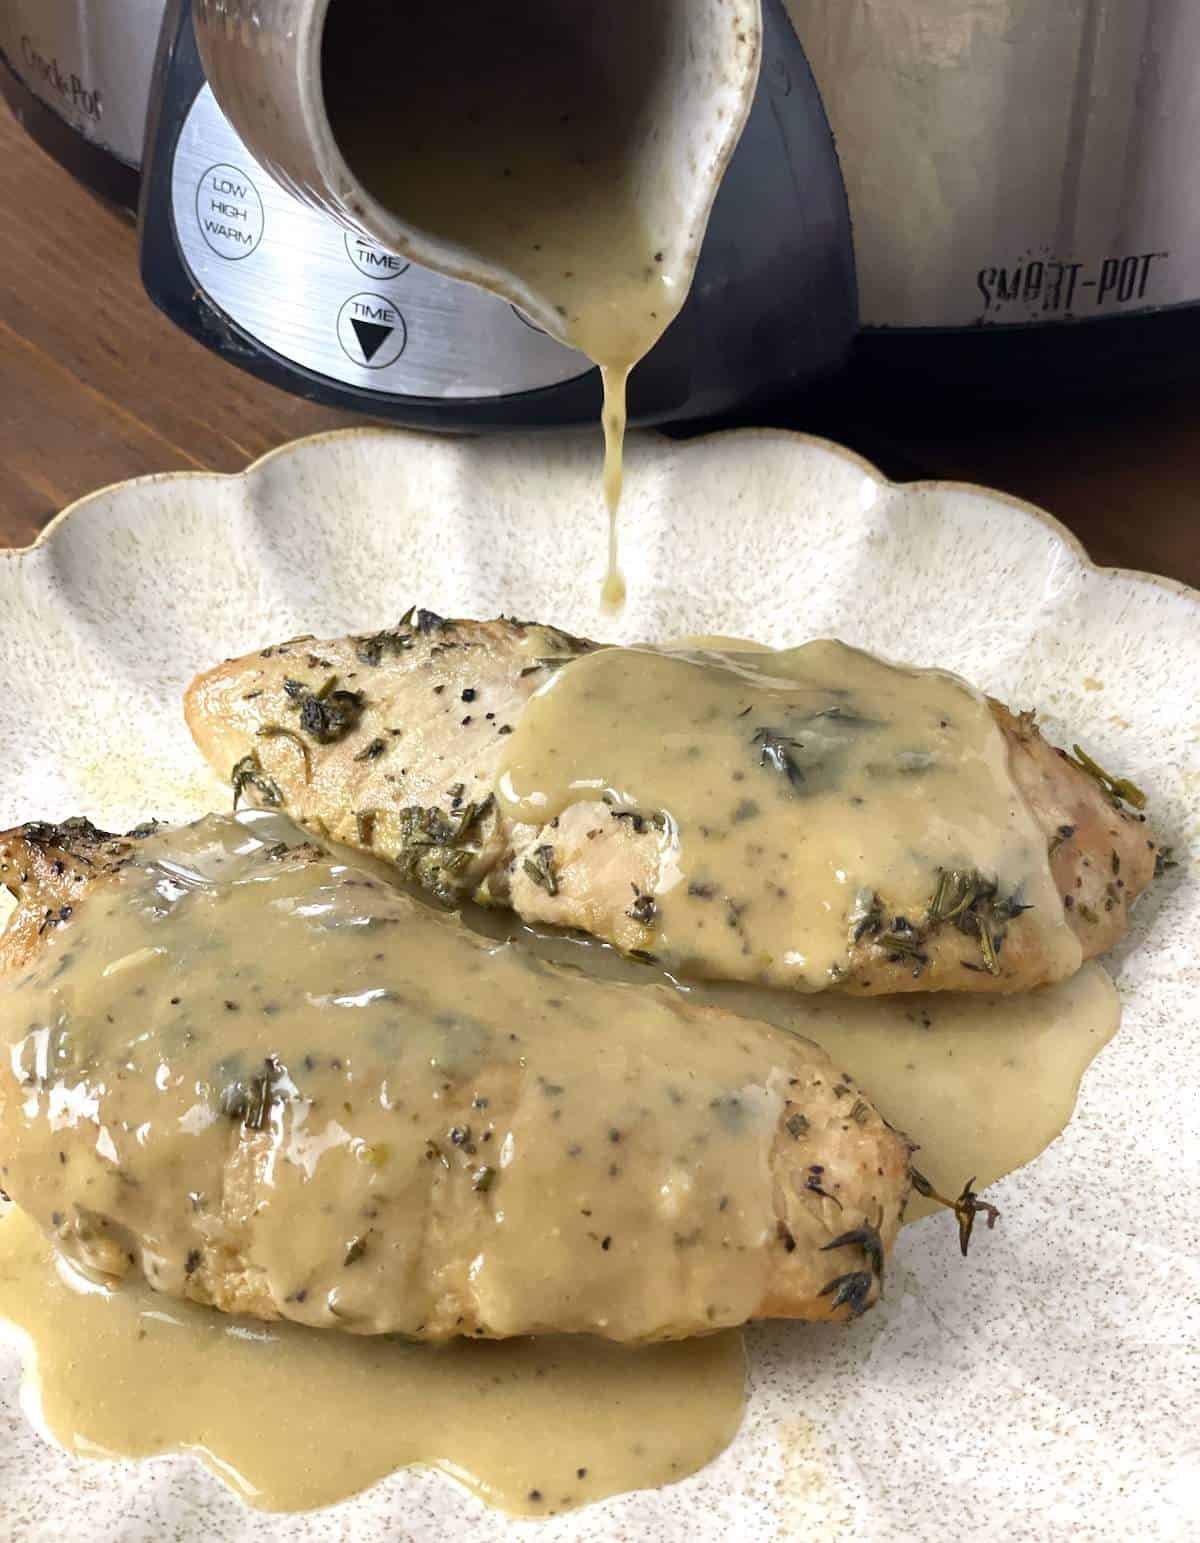 Two whole turkey tenderloins on a scalloped plate with gravy being poured over the top.